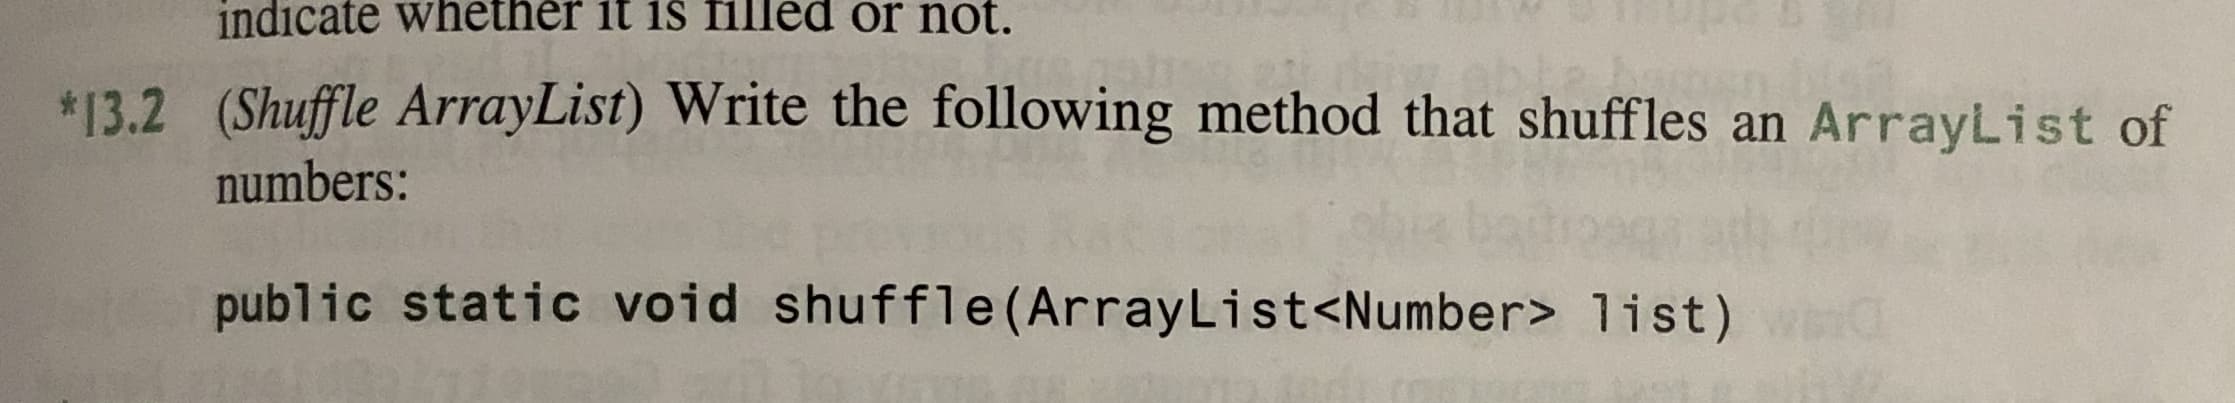 indicate whether it is filed or not.
13.2 (Shuffle ArrayList) Write the following method that shuffles an ArrayList of
numbers:
public static void shuffle (ArrayLi st<Number> 1ist)
